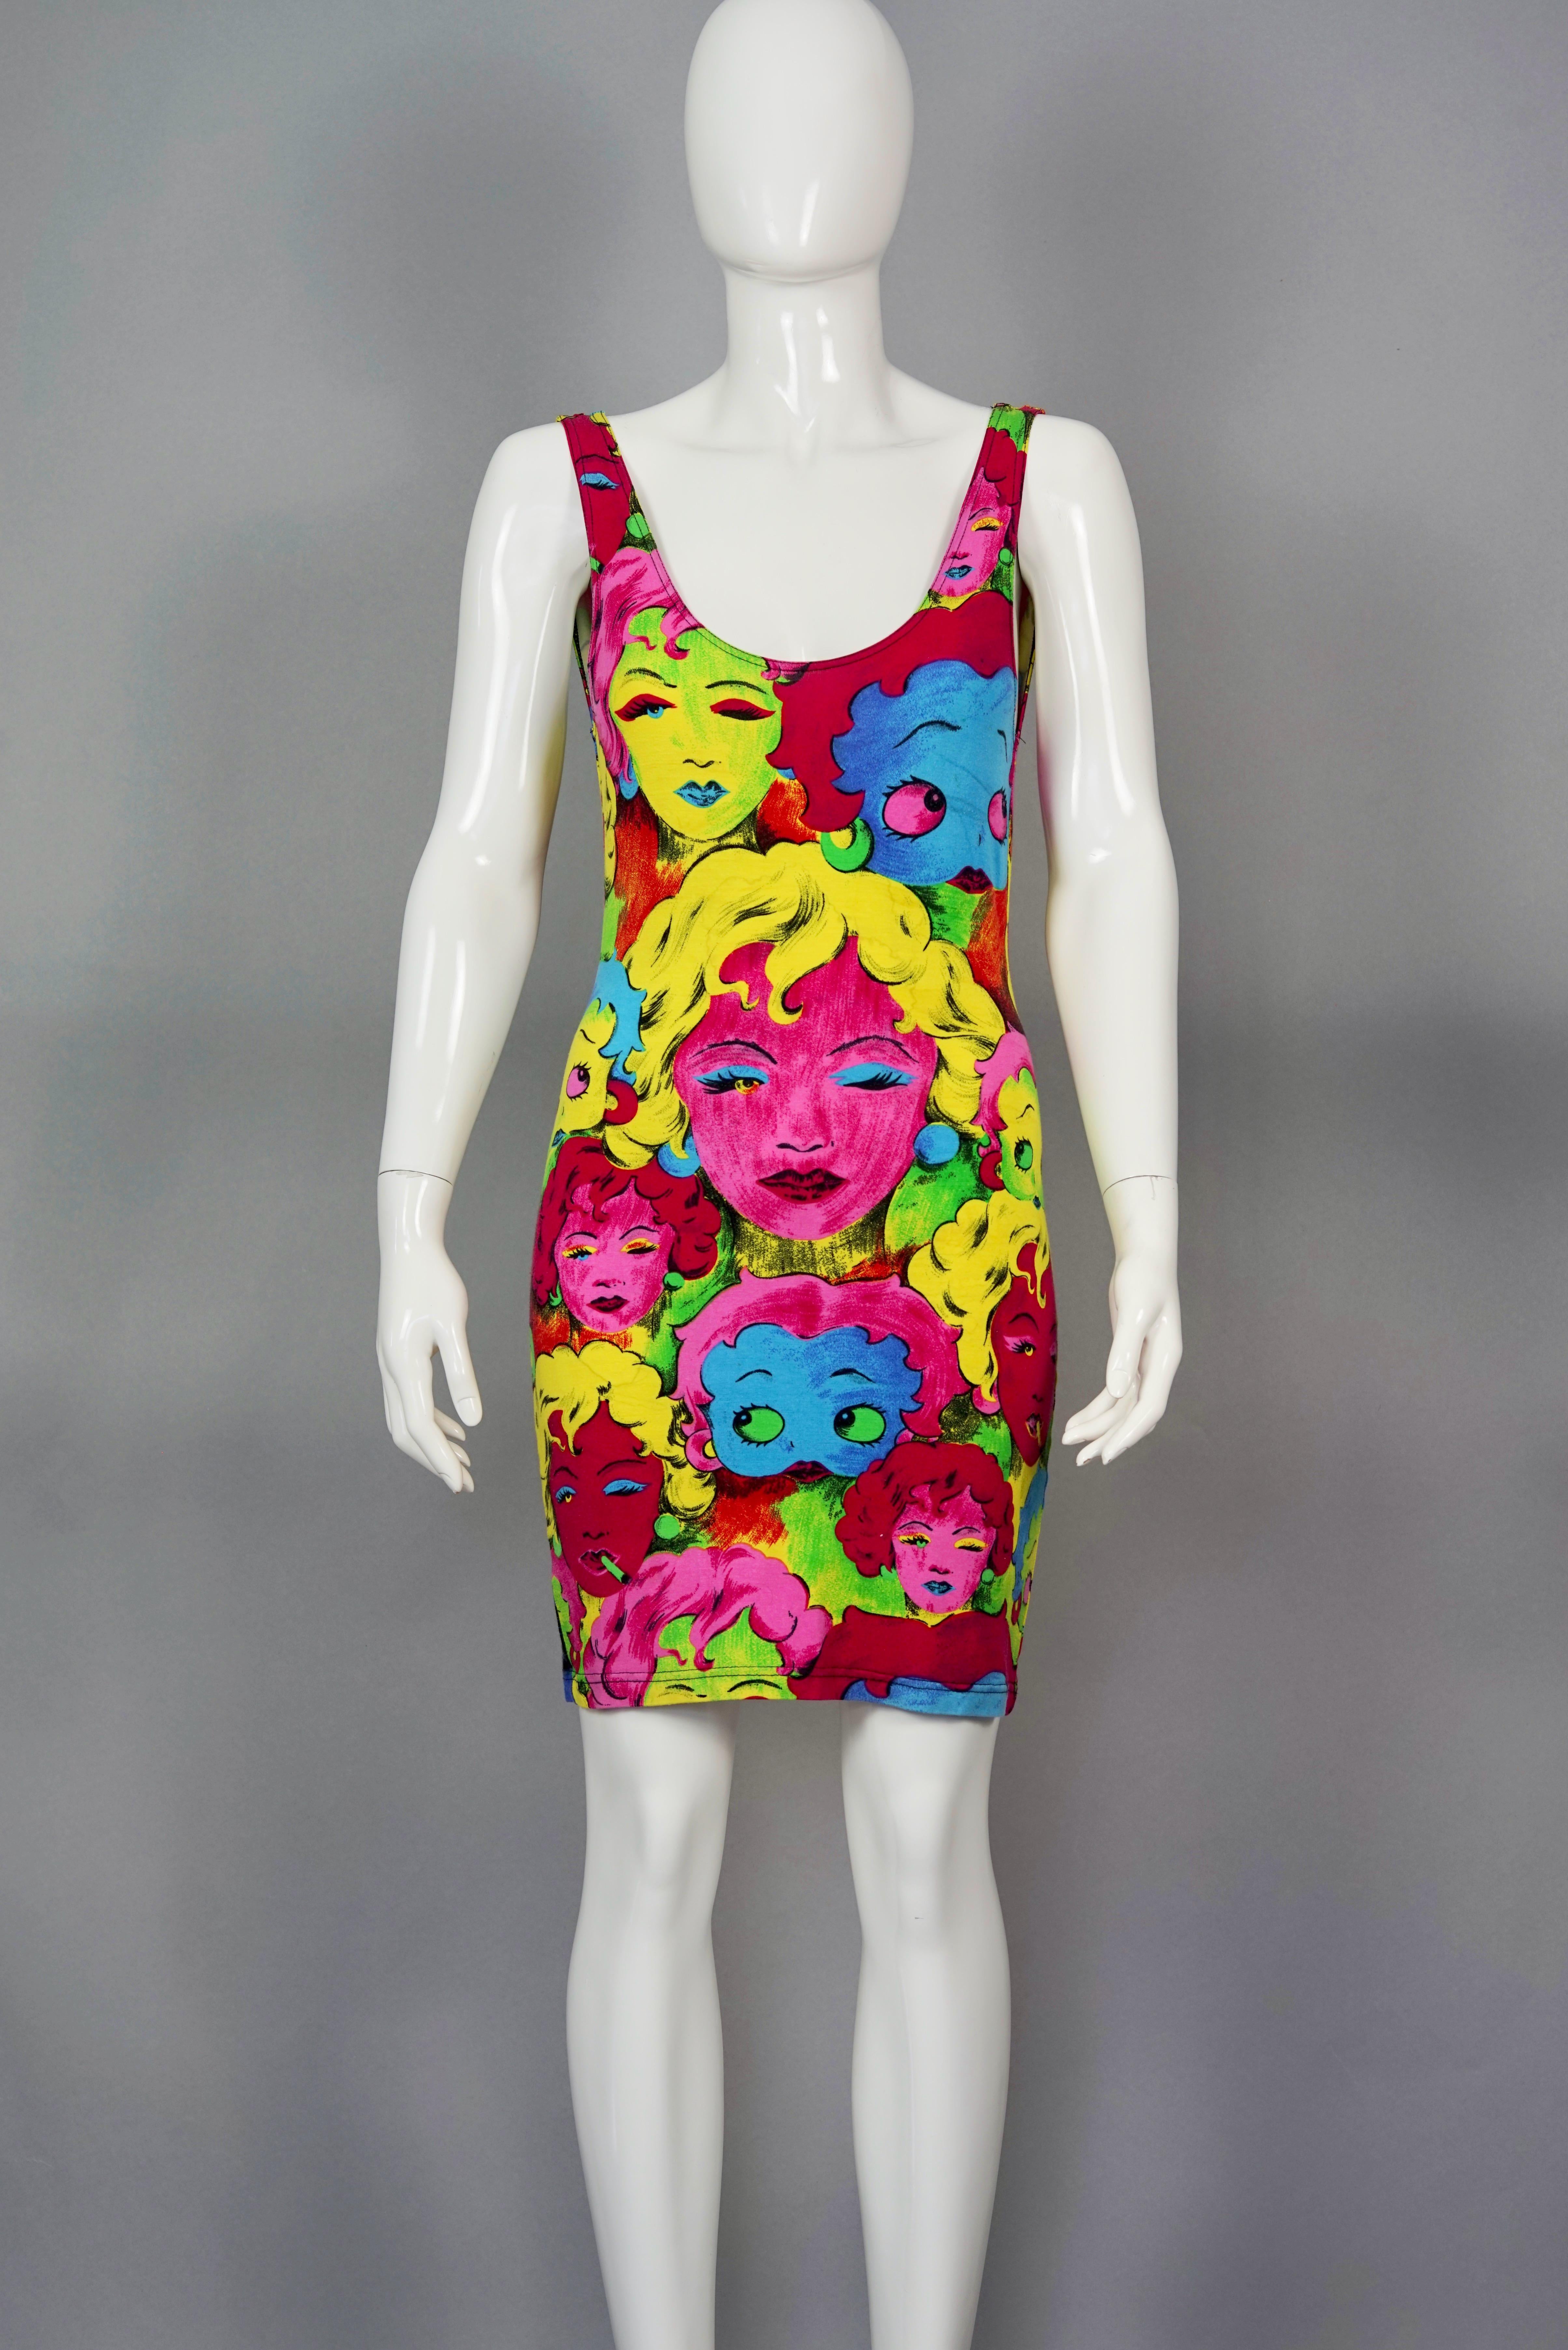 Vintage VERSACE Marilyn Monroe Betty Boop Cartoon Bodycon Dress

Measurements taken laid flat, please double waist and hips:
Shoulder: 14.17 inches (36 cm)
Bust: 15.35 inches (39 cm) without stretching
Waist: 12.99 inches  (33 cm) without